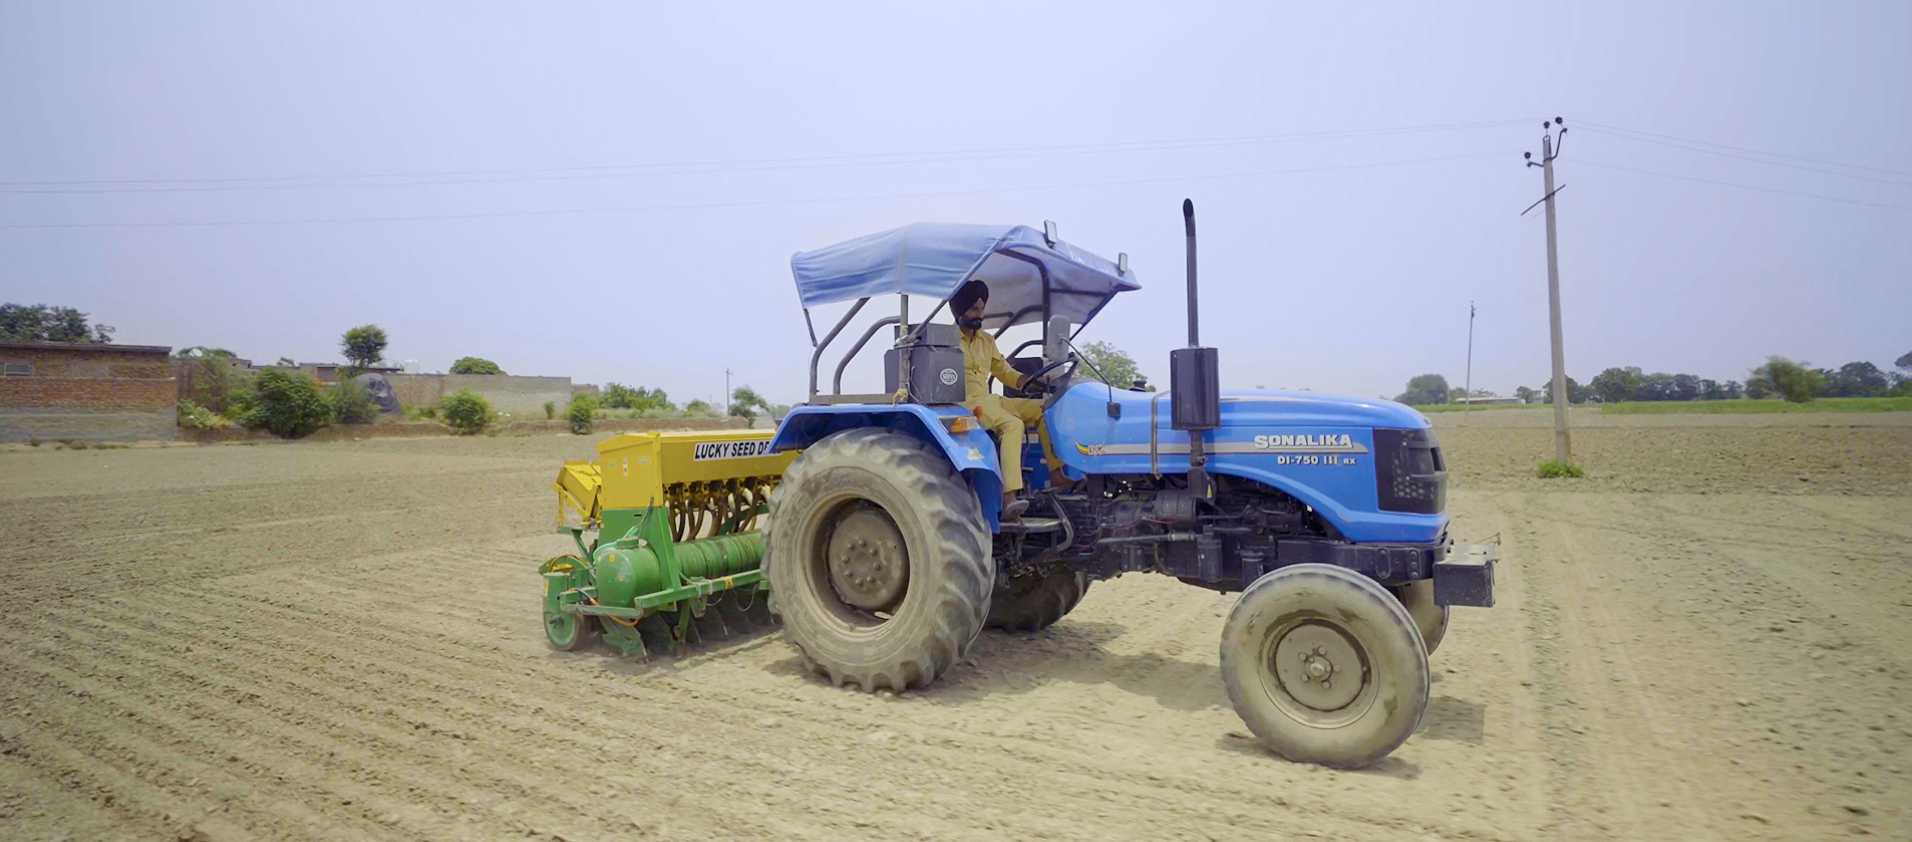 Crop residue processing machines